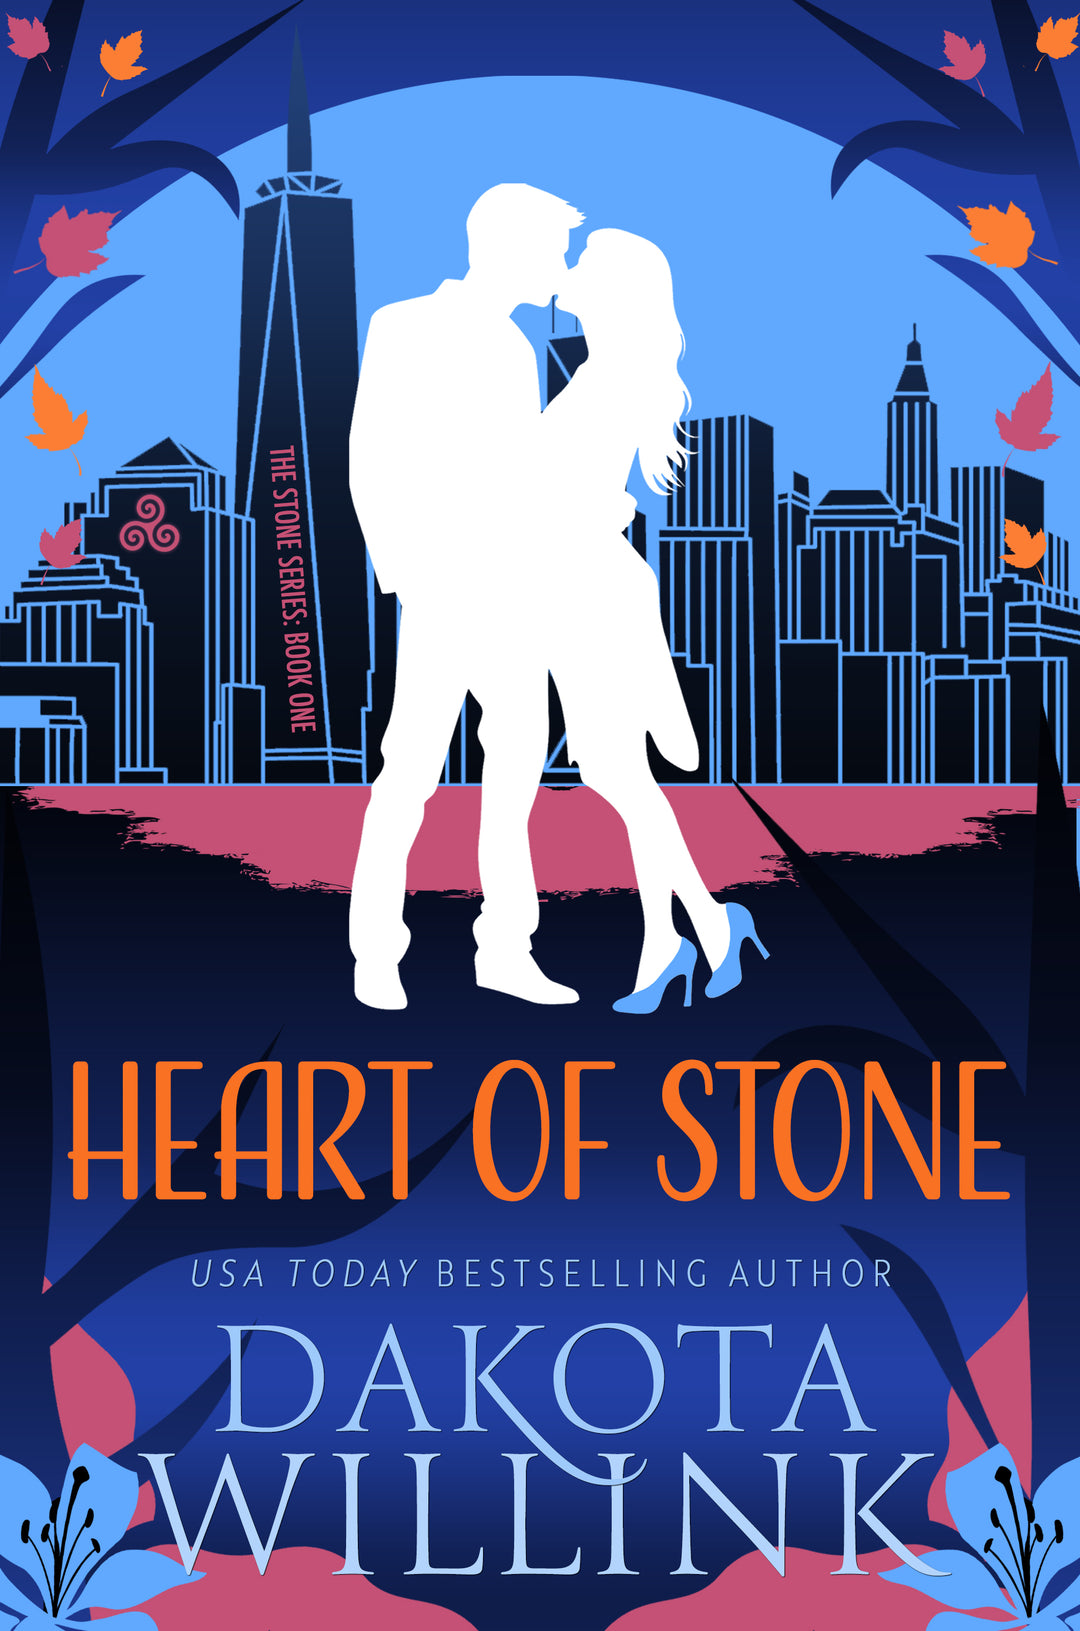 Heart of Stone (Clearance Hardcover, Full-Color Special Edition)